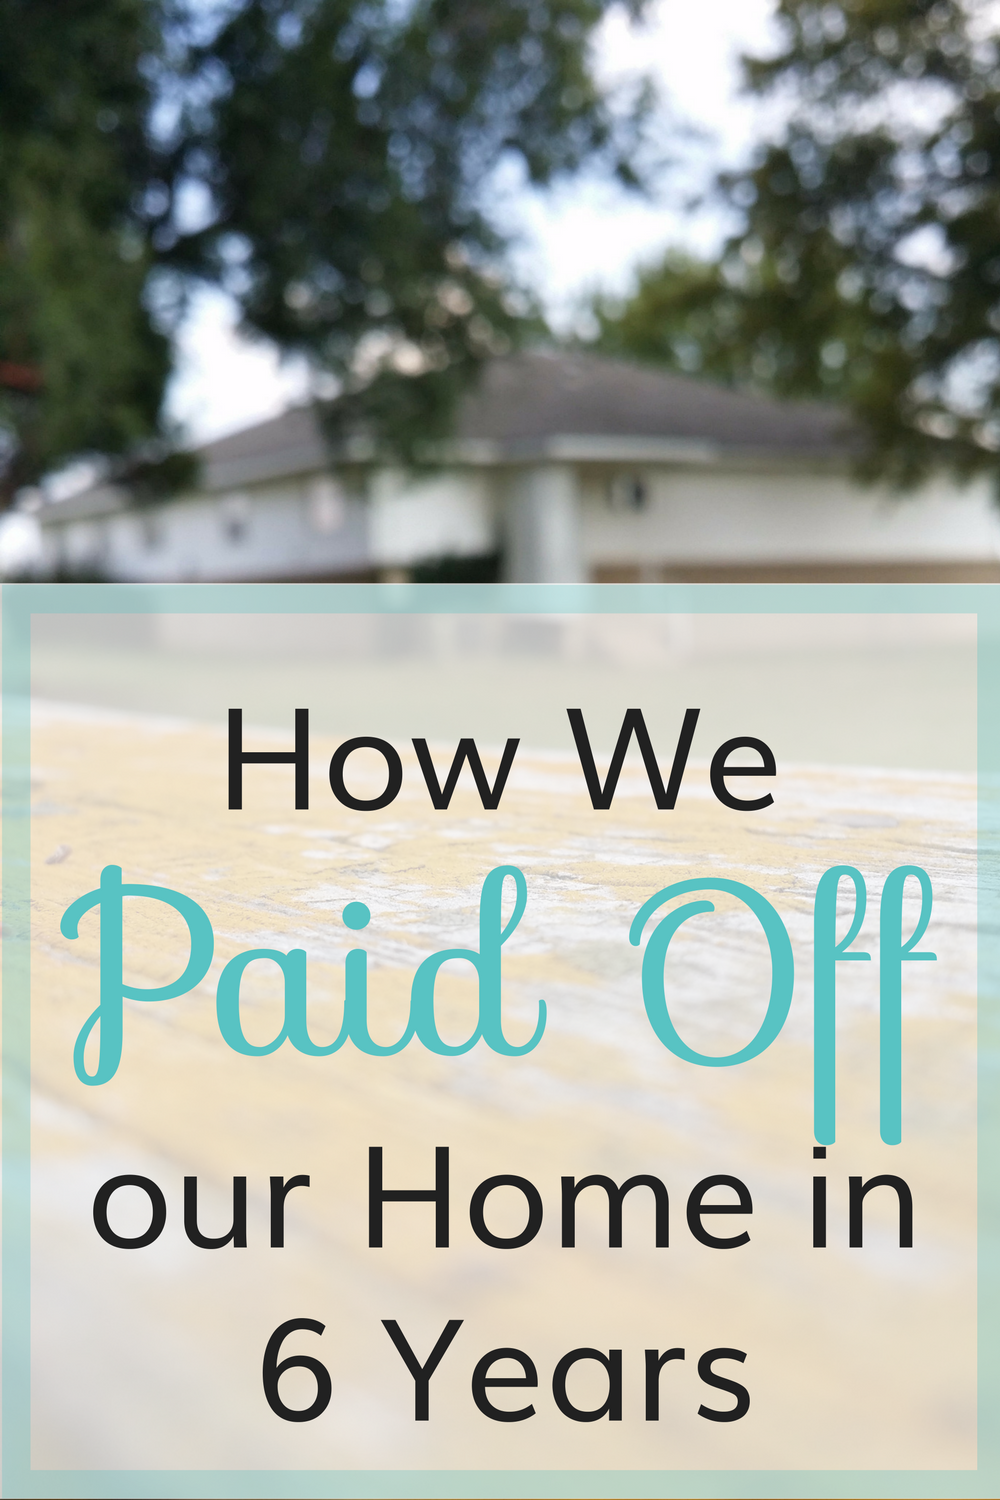 How We Paid Off Our Home in 6 Years